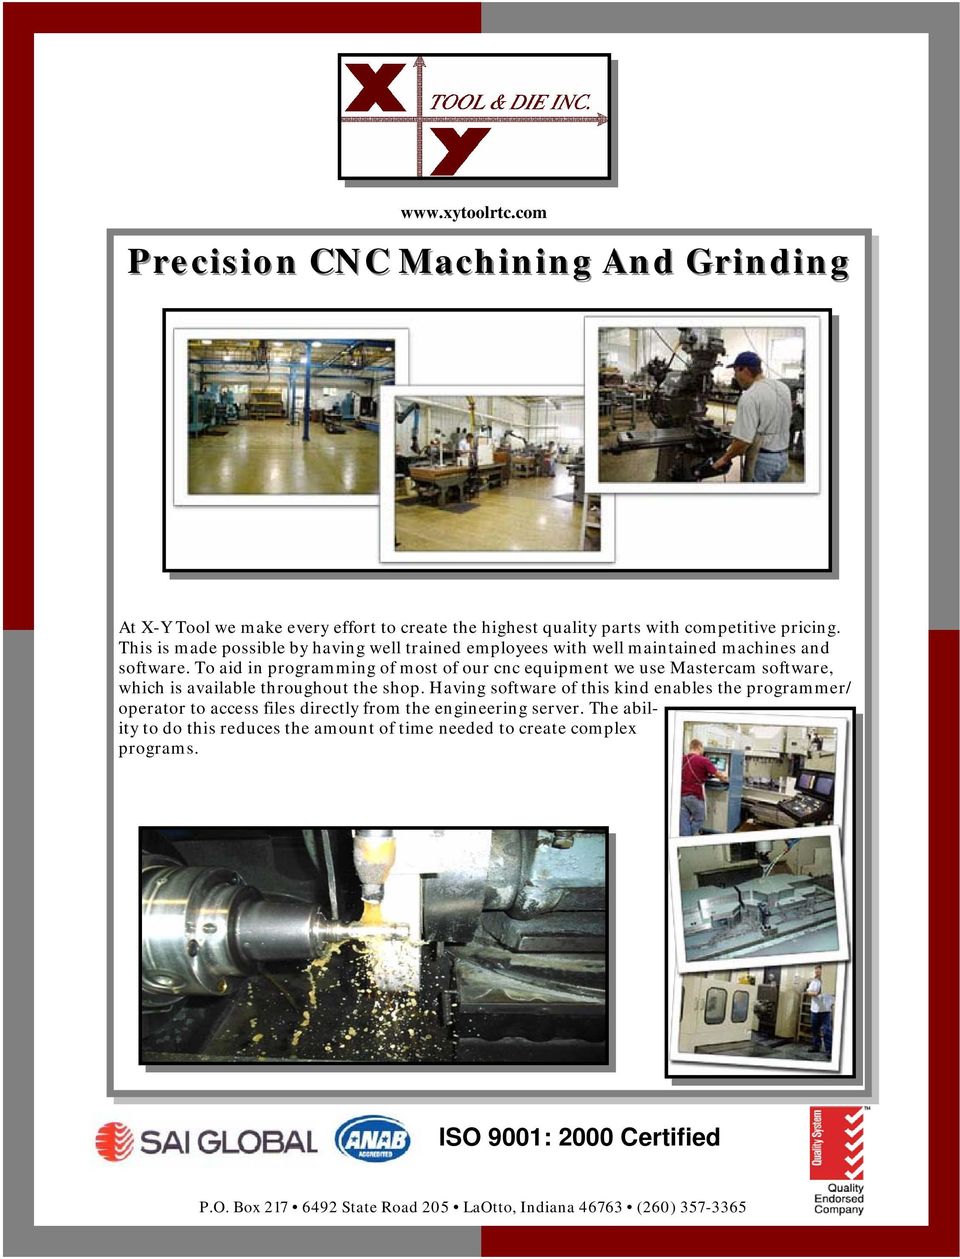 To aid in programming of most of our cnc equipment we use Mastercam software, which is available throughout the shop.